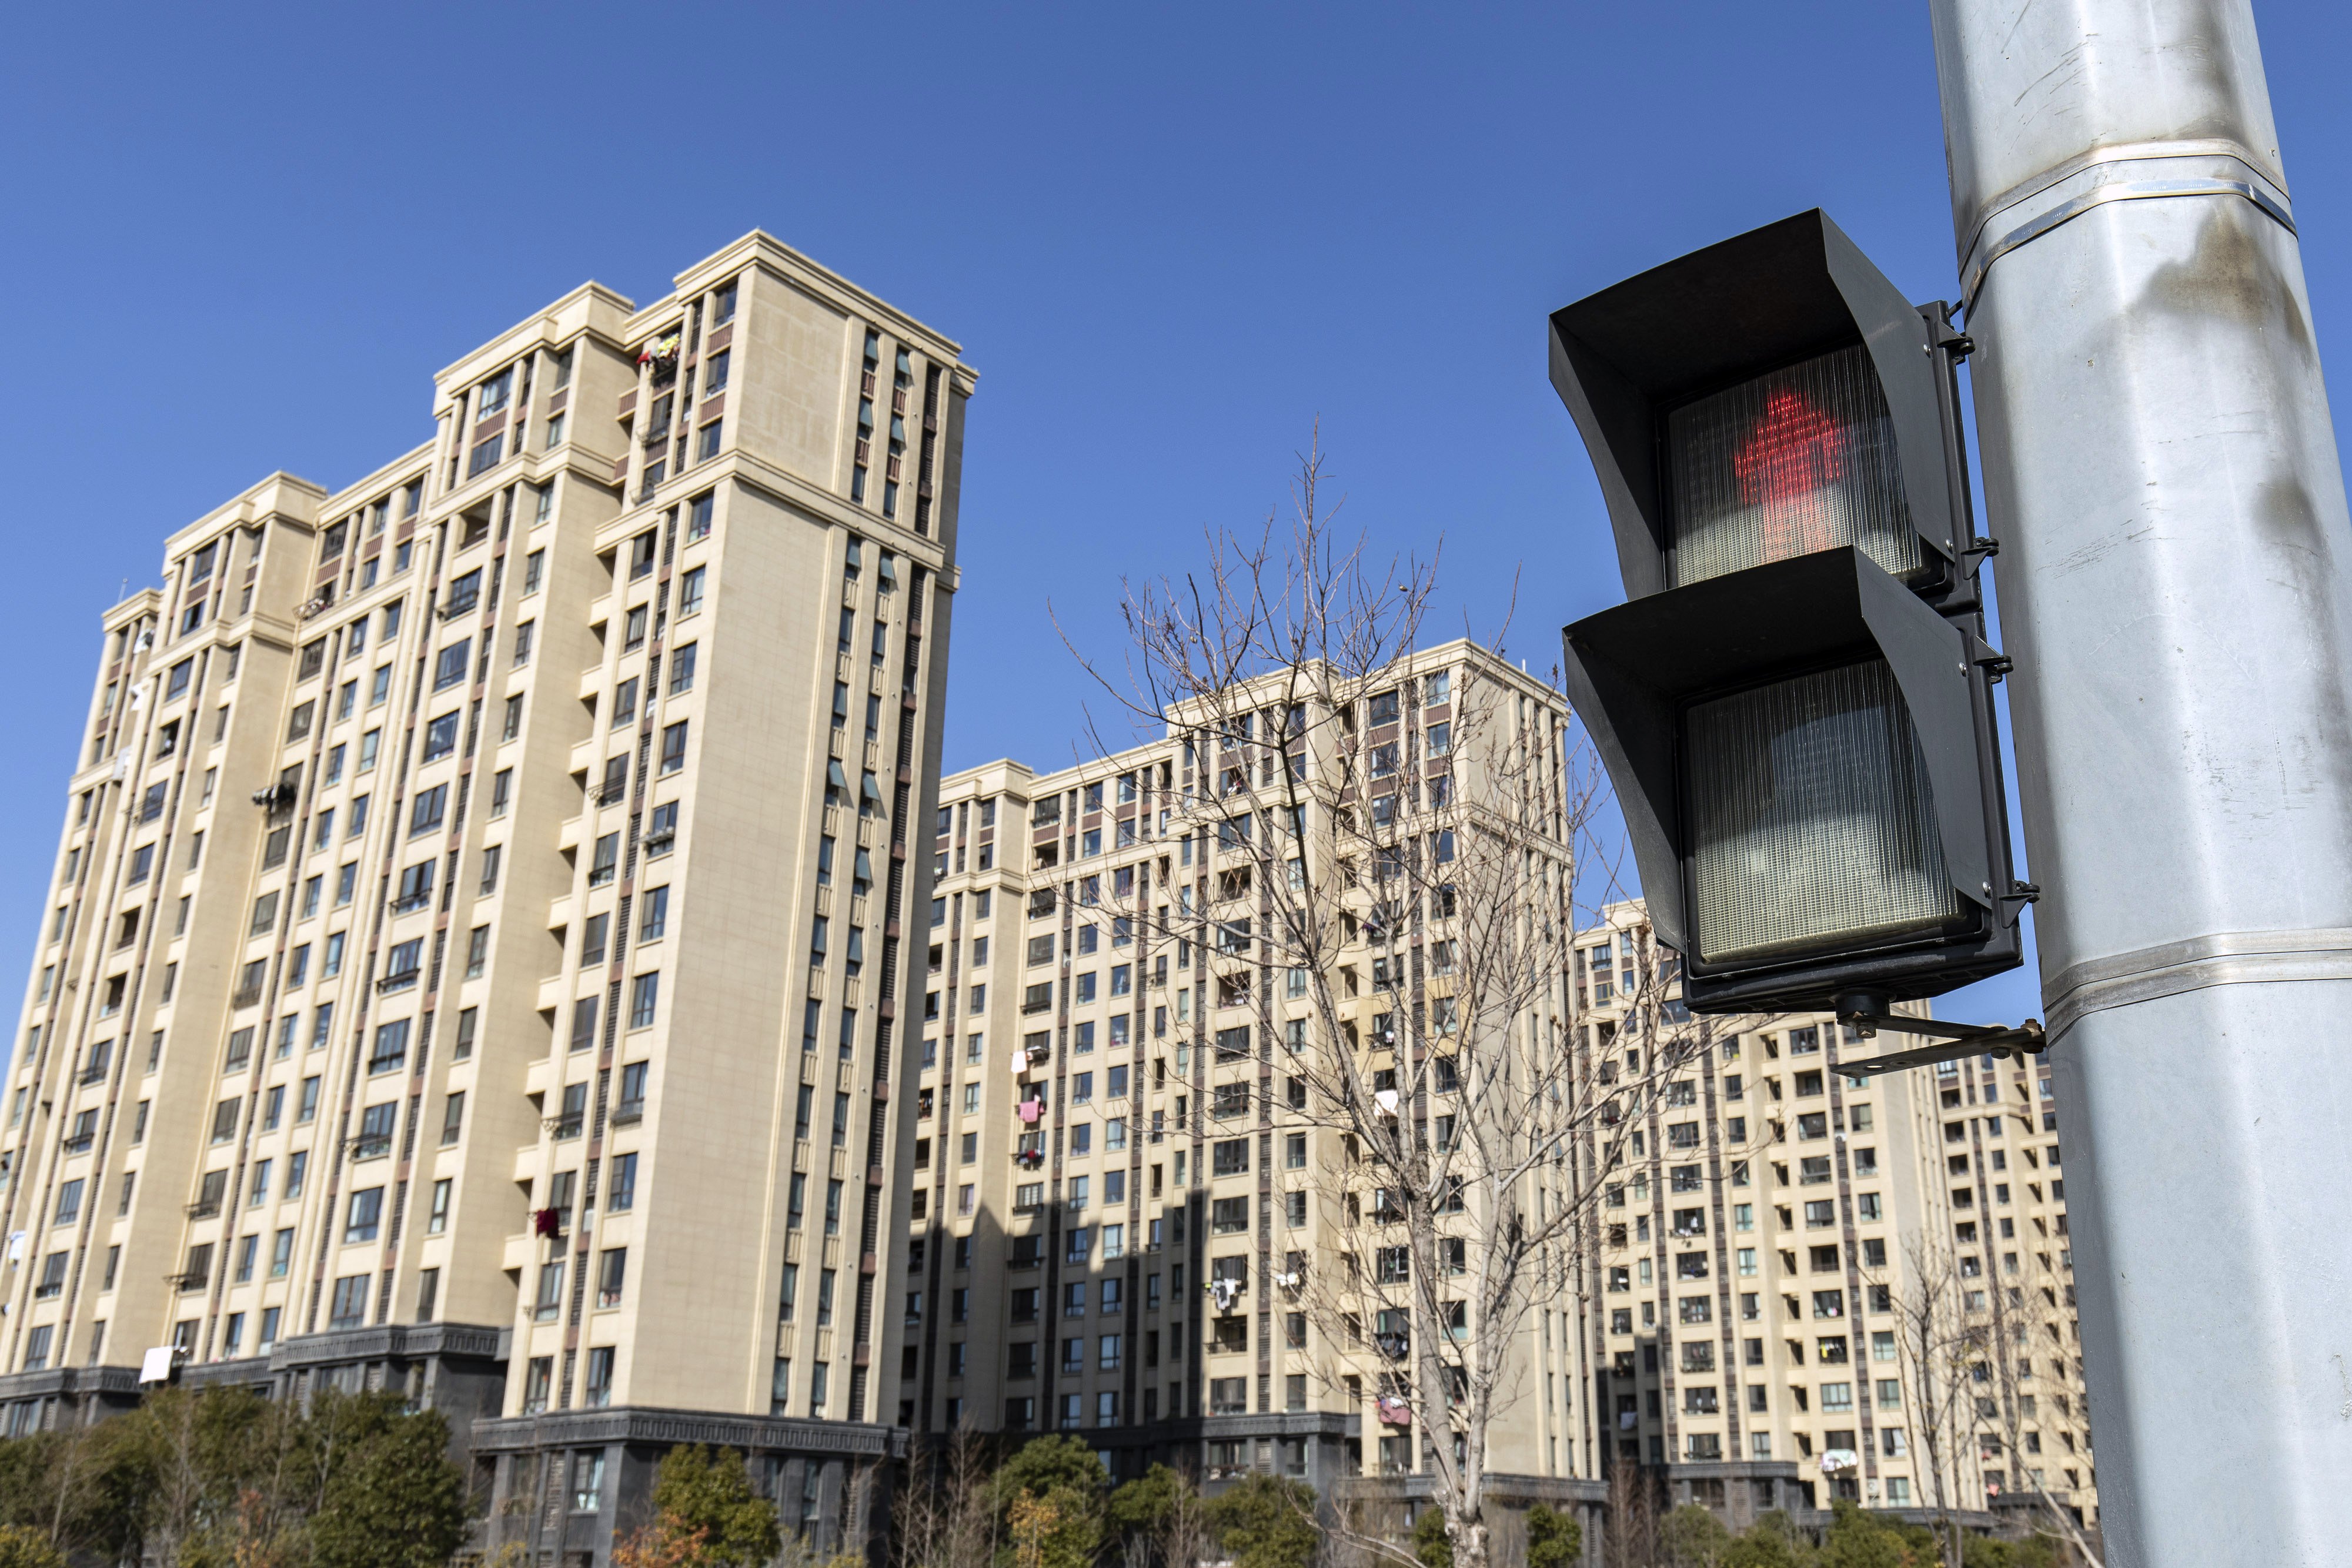 Residential buildings stand in a Zhenro Properties Group development in the Jinshan district of Shanghai on February 24, 2022. Photo: Bloomberg